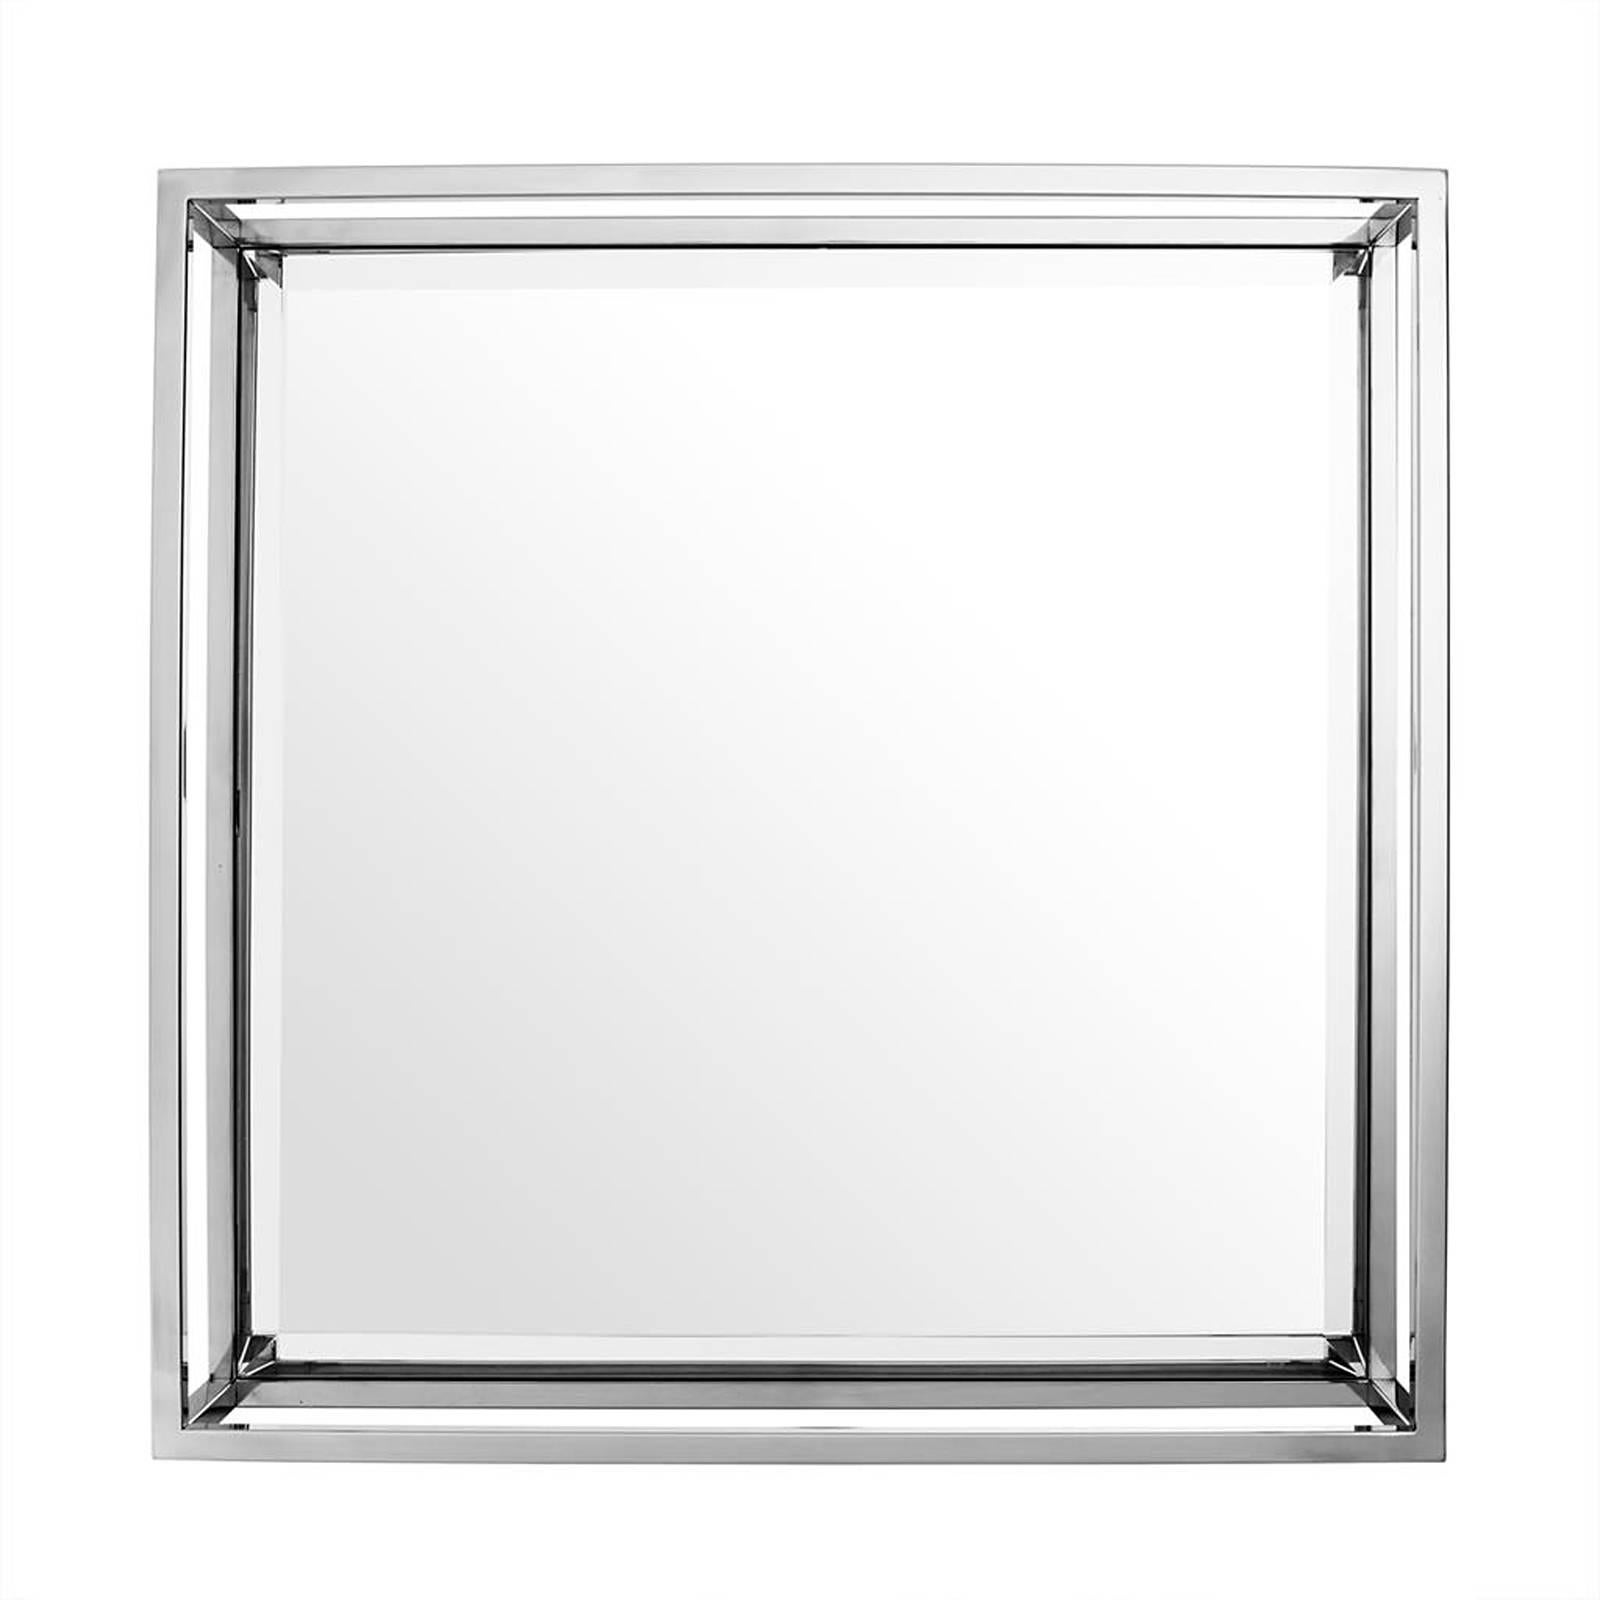 Chinese Crown Mirror in Polished Stainless Steel